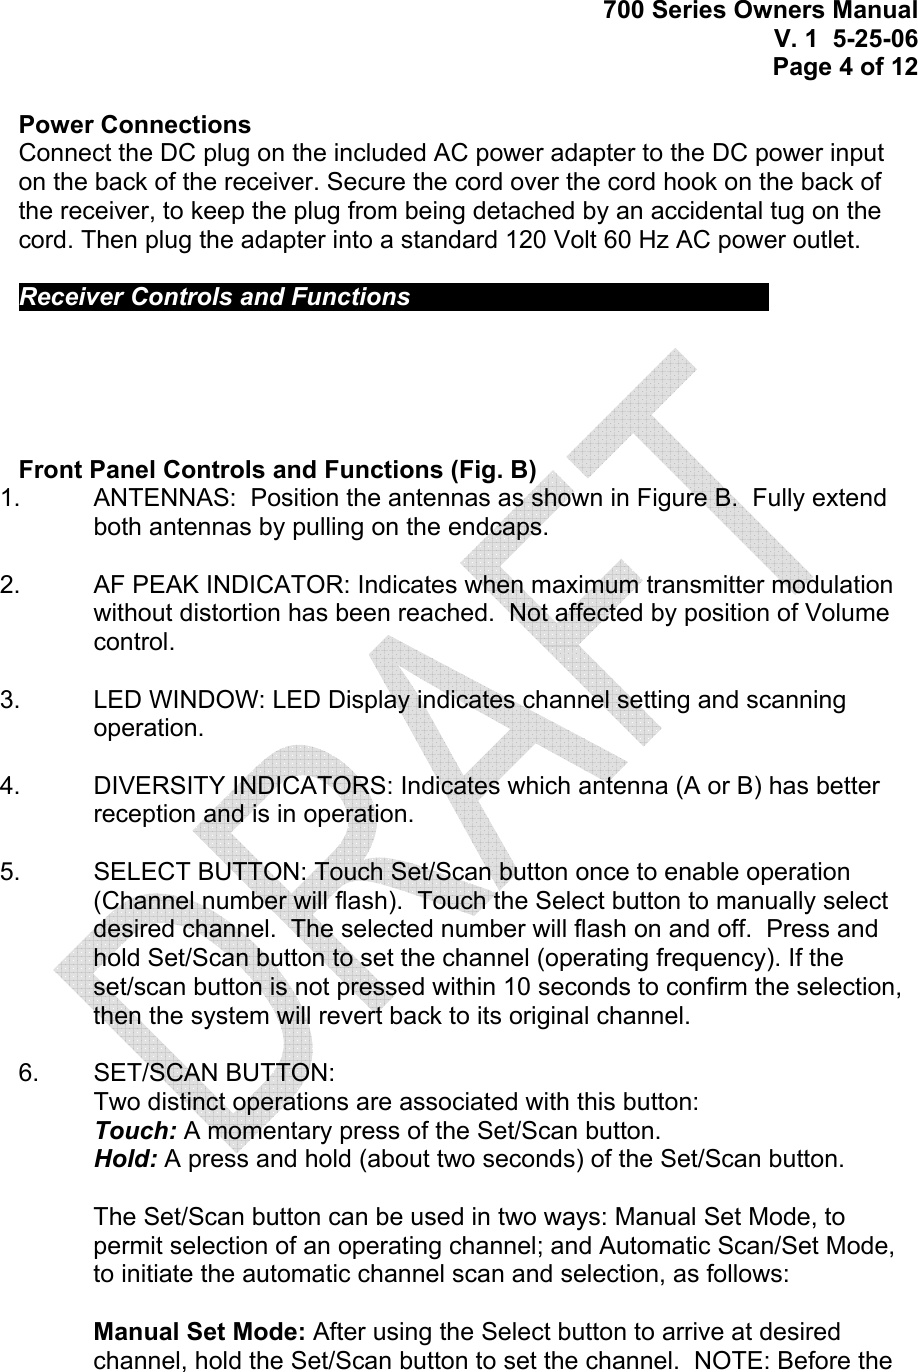 700 Series Owners Manual V. 1  5-25-06 Page 4 of 12  Power Connections Connect the DC plug on the included AC power adapter to the DC power input on the back of the receiver. Secure the cord over the cord hook on the back of the receiver, to keep the plug from being detached by an accidental tug on the cord. Then plug the adapter into a standard 120 Volt 60 Hz AC power outlet.   Receiver Controls and Functions             Front Panel Controls and Functions (Fig. B) 1.    ANTENNAS:  Position the antennas as shown in Figure B.  Fully extend both antennas by pulling on the endcaps.  2.    AF PEAK INDICATOR: Indicates when maximum transmitter modulation without distortion has been reached.  Not affected by position of Volume control.  3.   LED WINDOW: LED Display indicates channel setting and scanning operation.    4.    DIVERSITY INDICATORS: Indicates which antenna (A or B) has better reception and is in operation.  5.   SELECT BUTTON: Touch Set/Scan button once to enable operation (Channel number will flash).  Touch the Select button to manually select desired channel.  The selected number will flash on and off.  Press and hold Set/Scan button to set the channel (operating frequency). If the set/scan button is not pressed within 10 seconds to confirm the selection, then the system will revert back to its original channel.  6.   SET/SCAN BUTTON:  Two distinct operations are associated with this button: Touch: A momentary press of the Set/Scan button. Hold: A press and hold (about two seconds) of the Set/Scan button.  The Set/Scan button can be used in two ways: Manual Set Mode, to permit selection of an operating channel; and Automatic Scan/Set Mode, to initiate the automatic channel scan and selection, as follows:  Manual Set Mode: After using the Select button to arrive at desired channel, hold the Set/Scan button to set the channel.  NOTE: Before the 